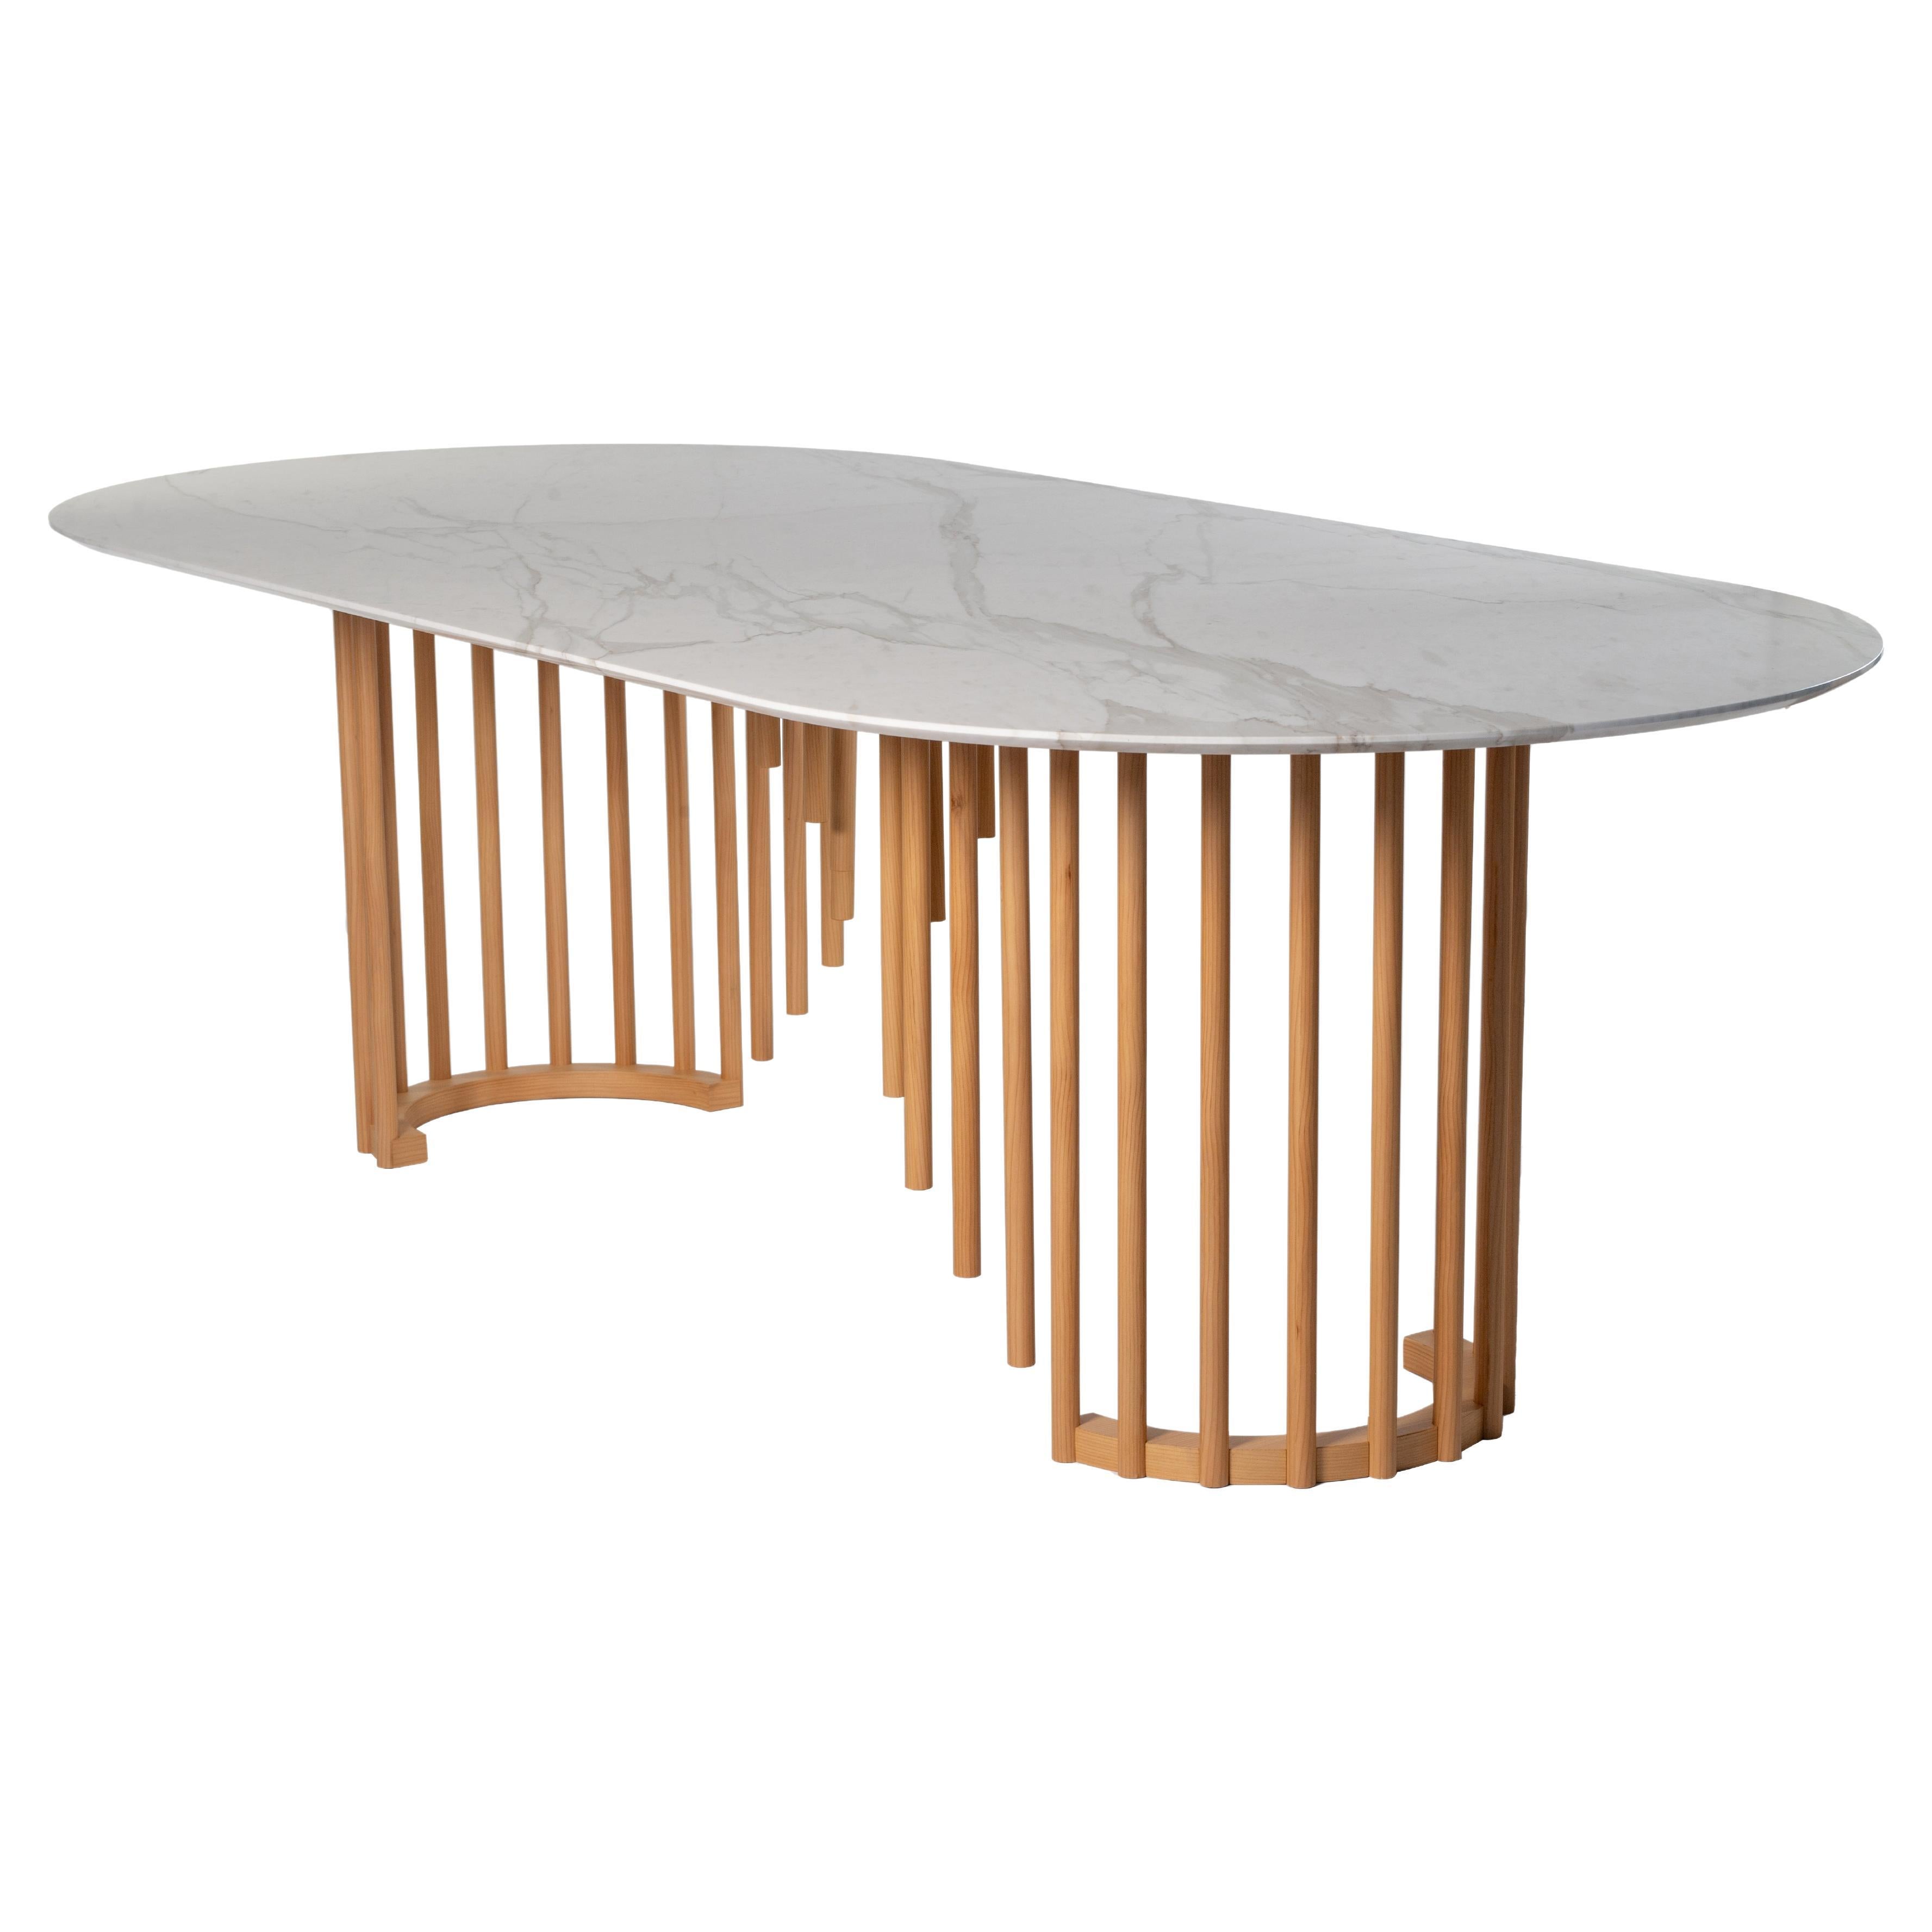 This enchanting cedar table is a tribute to the natural lightness of reed. The bold and luminous ellipsoidal top in white Calacatta marble is gracefully supported by the reed-shaped elements of different lengths that trace the seductive profile of